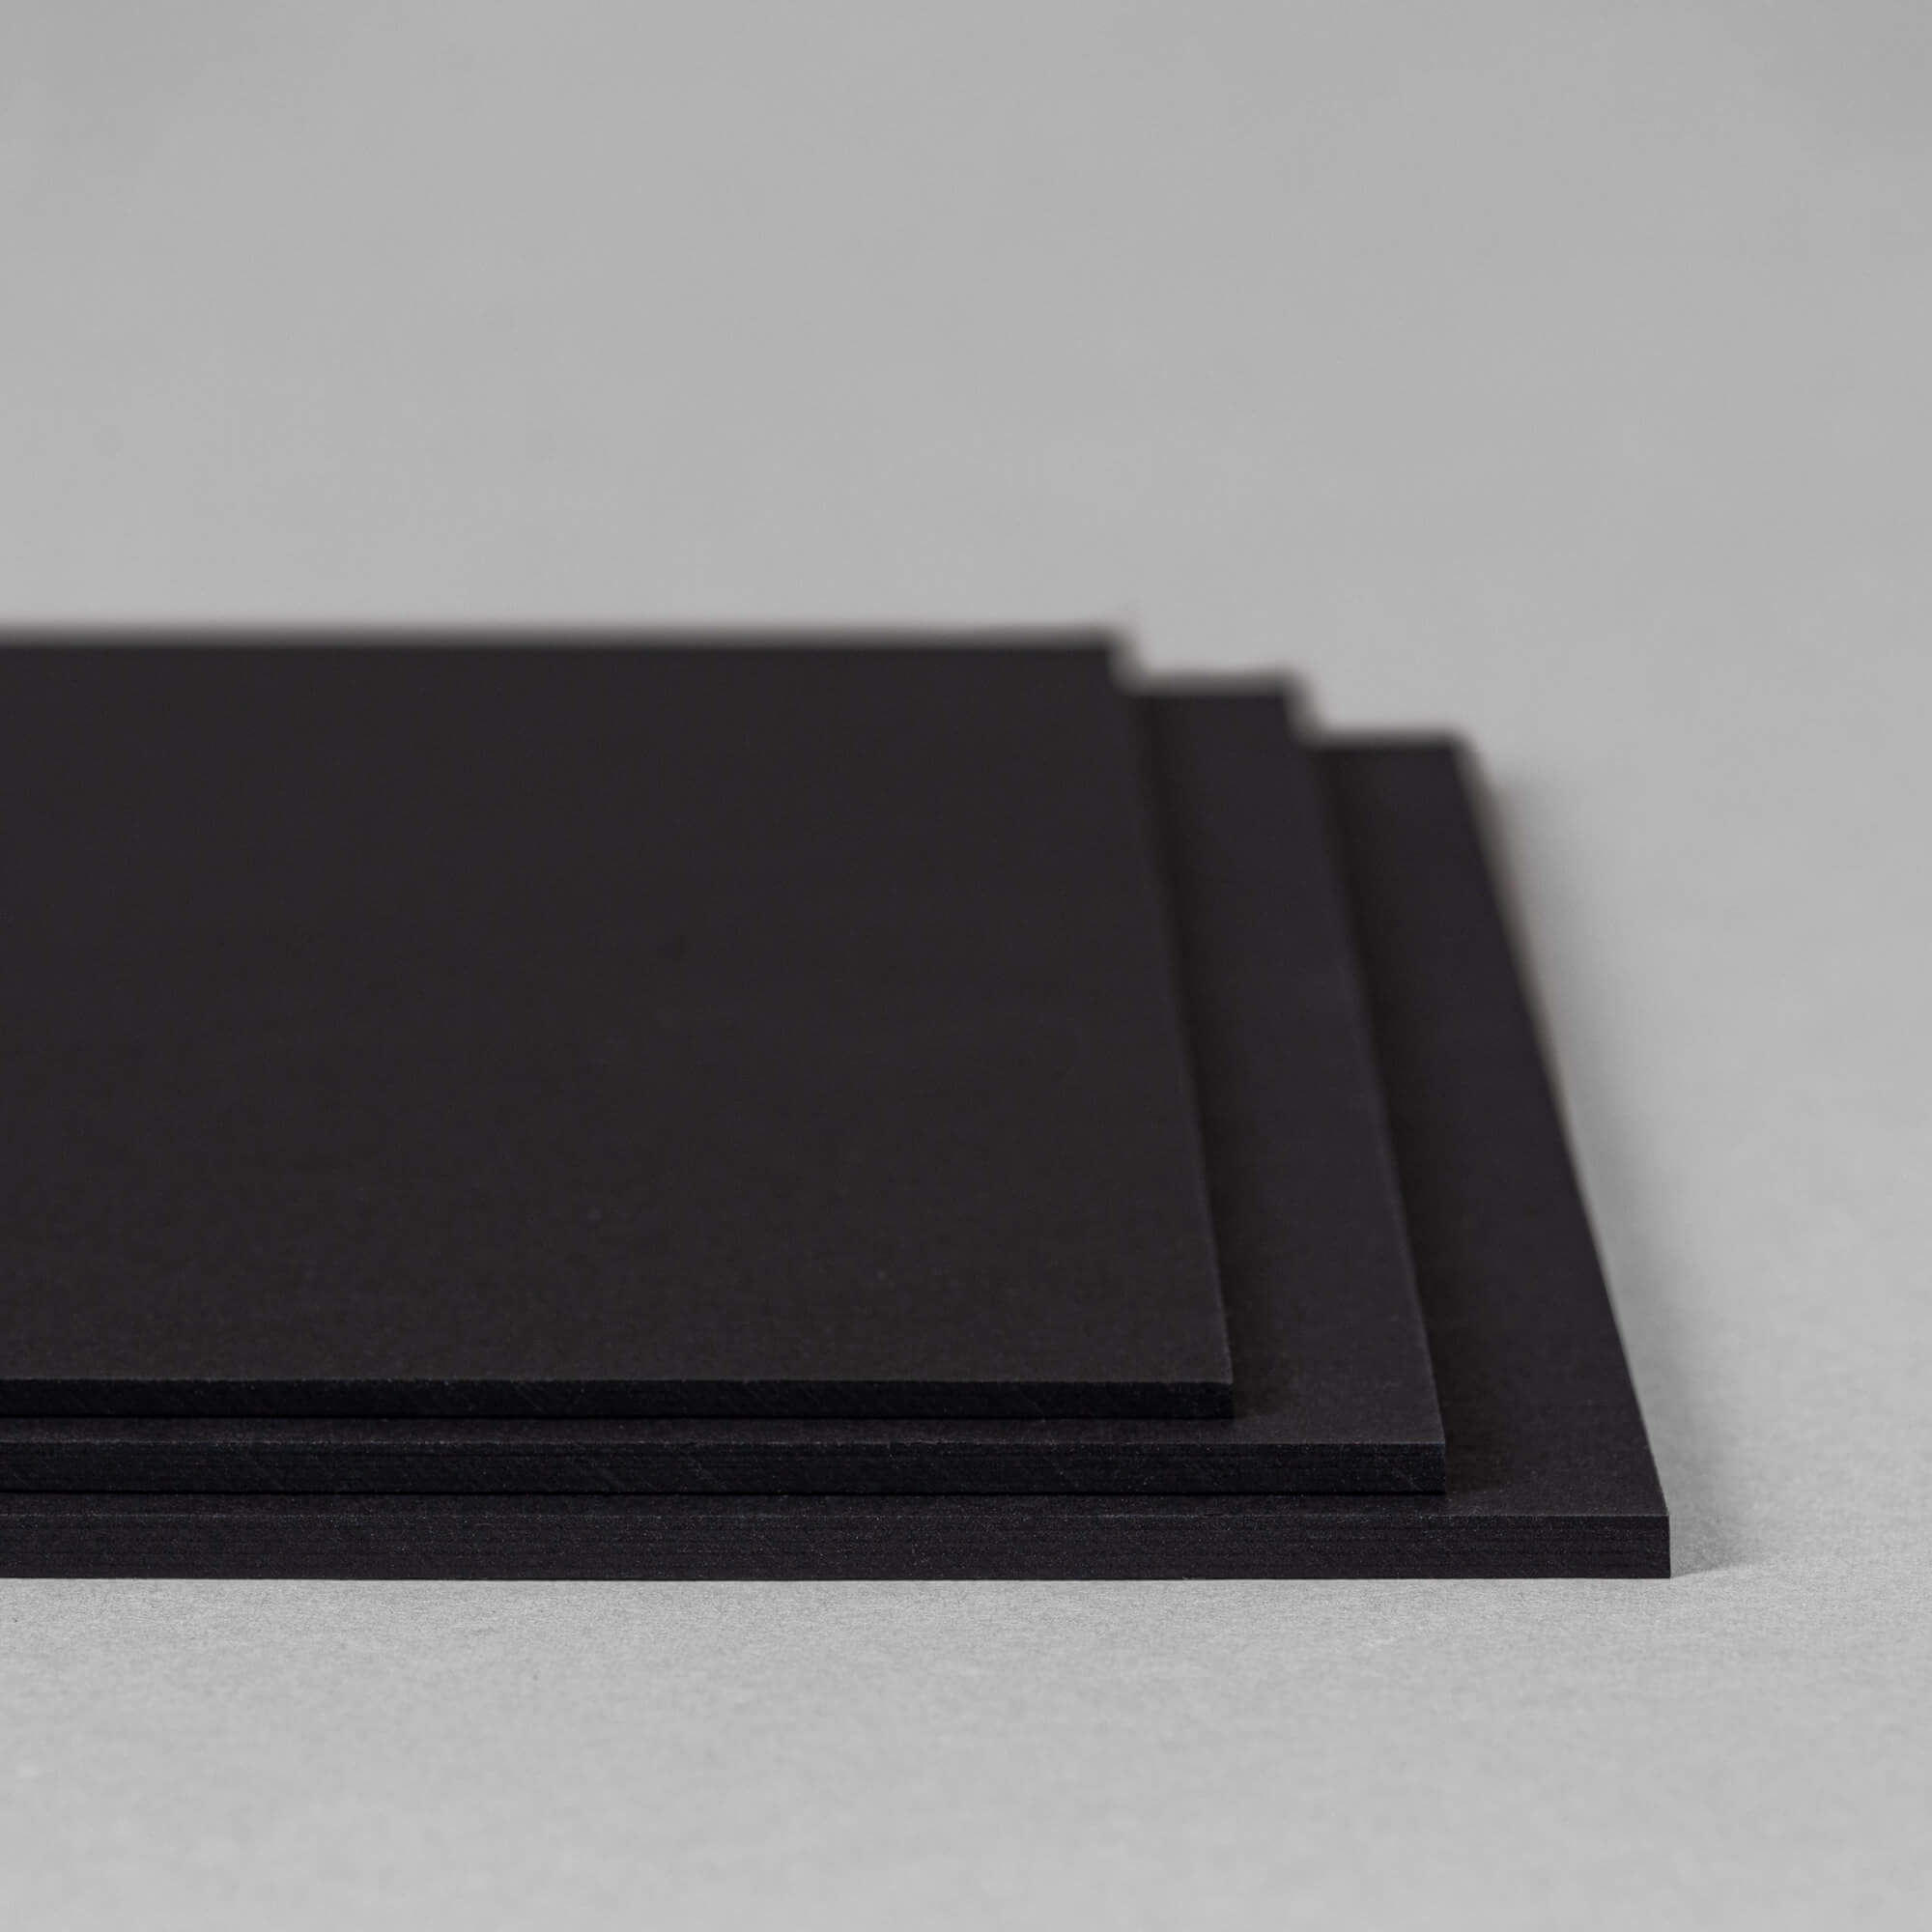 Display carton KROMA All Black in various thicknesses